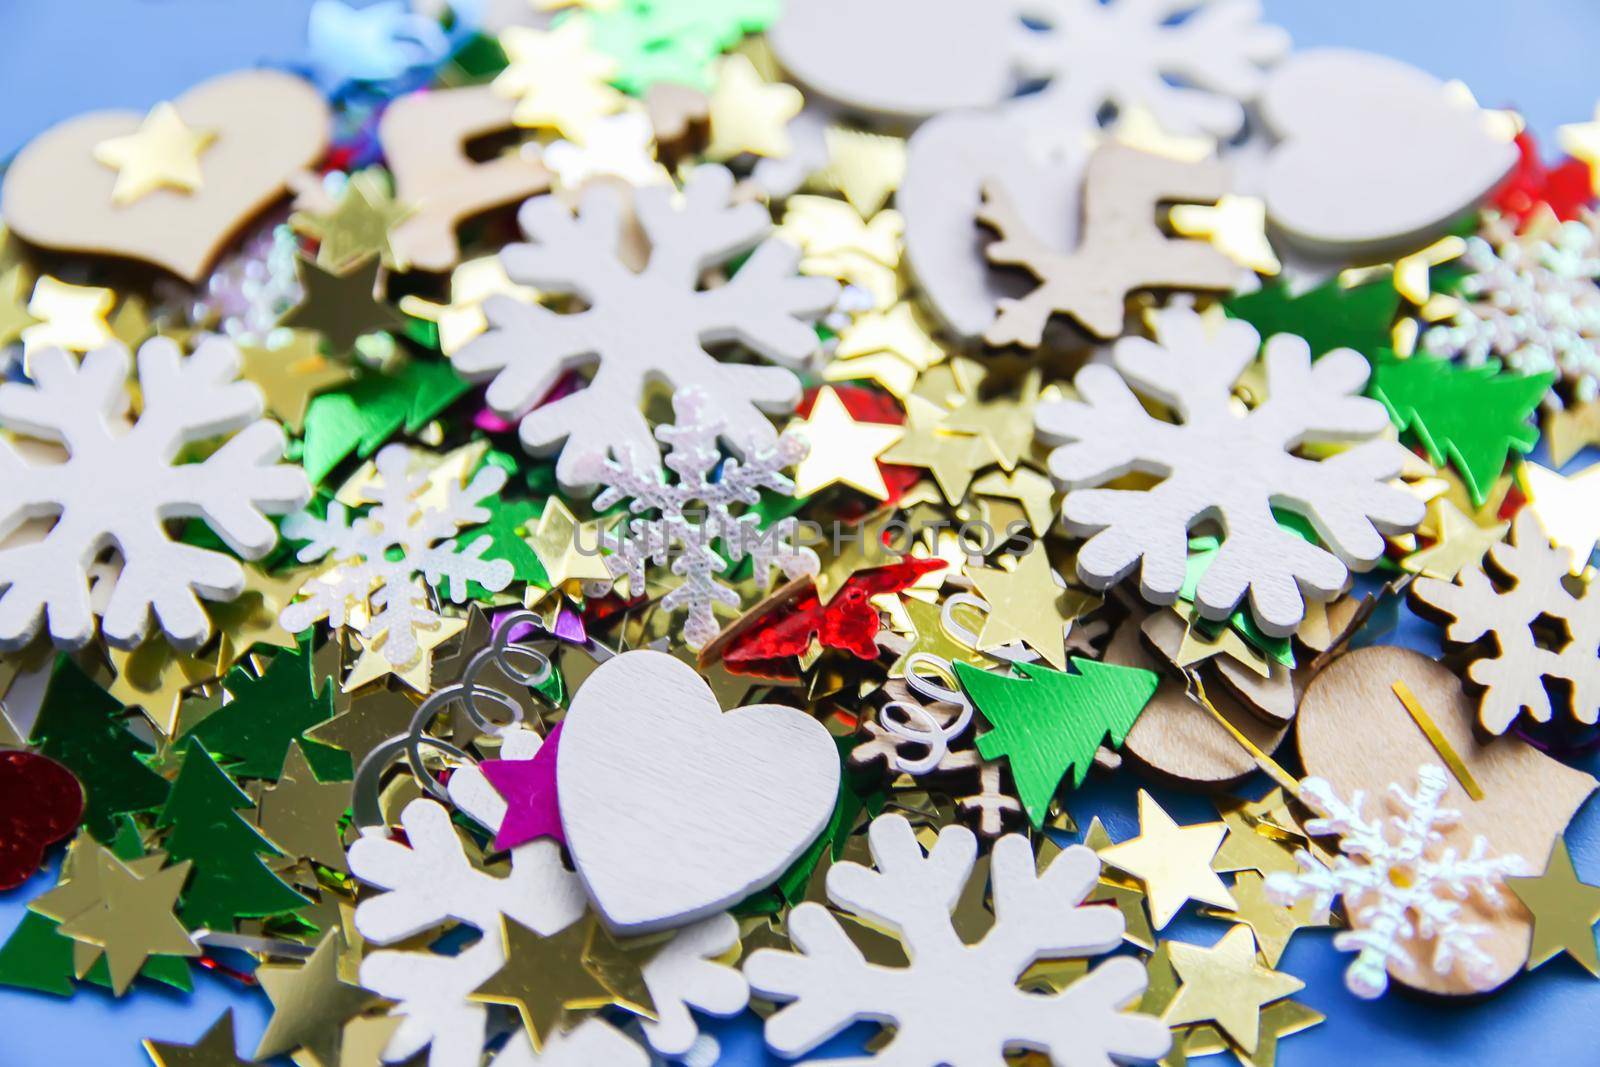 Christmas and New Year decorative background with small wooden snowflakes. Colorful tinsel. Festive confetti.